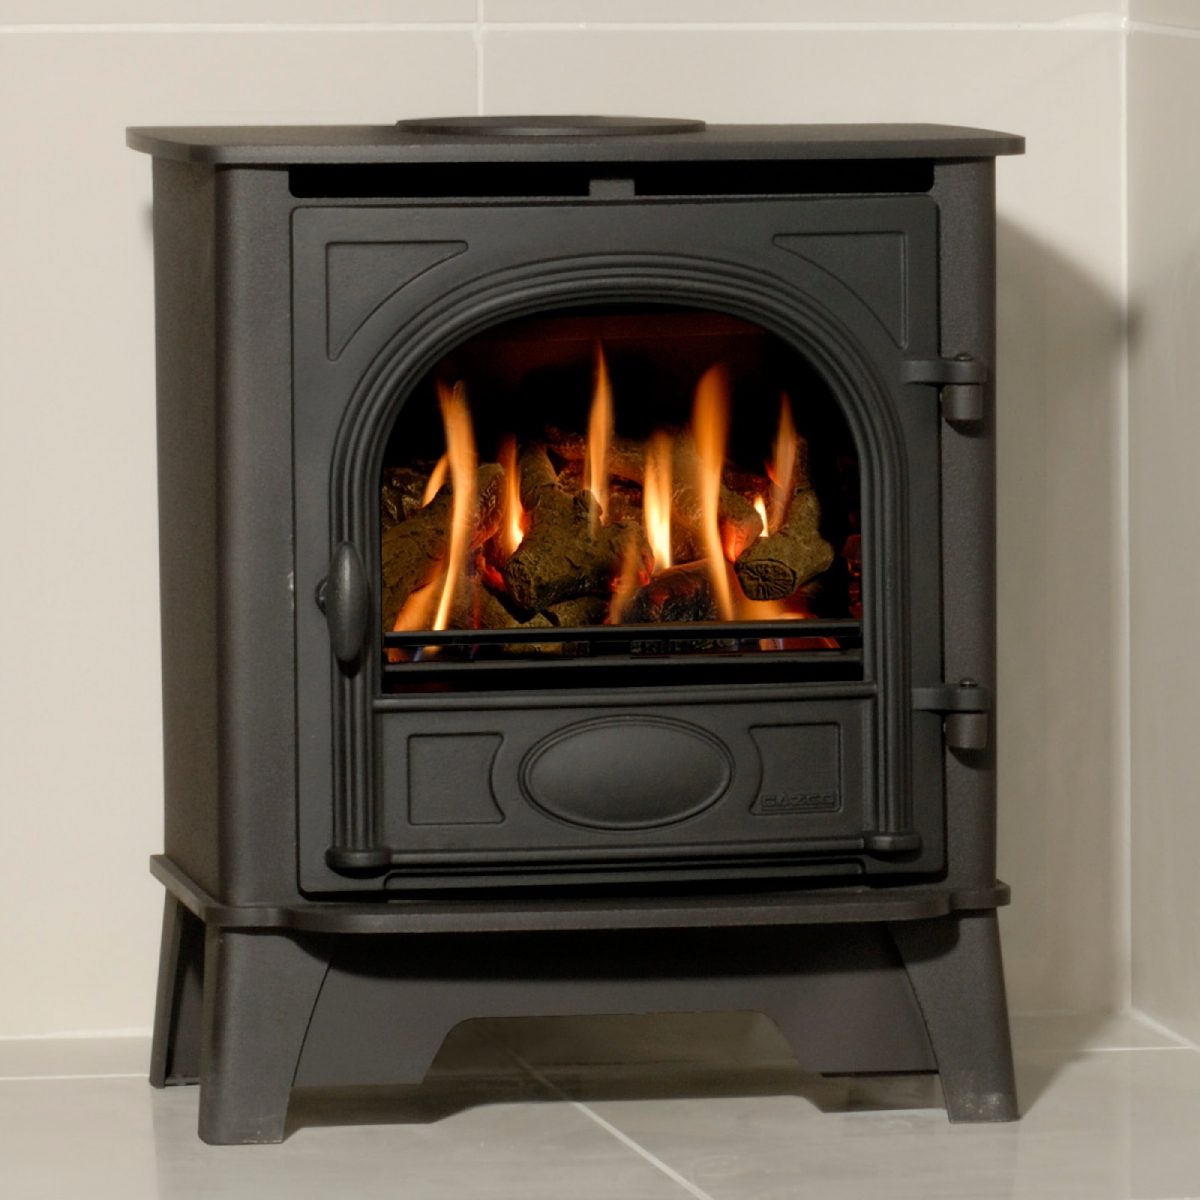 With authentic Wood Burning stove styling, right down to the hinged door with handle, the Gazco Stockton 5, Log Effect, LPG Gas, Balanced Flue Stove is conveniently sized between the Gazco small and medium gas stove models.